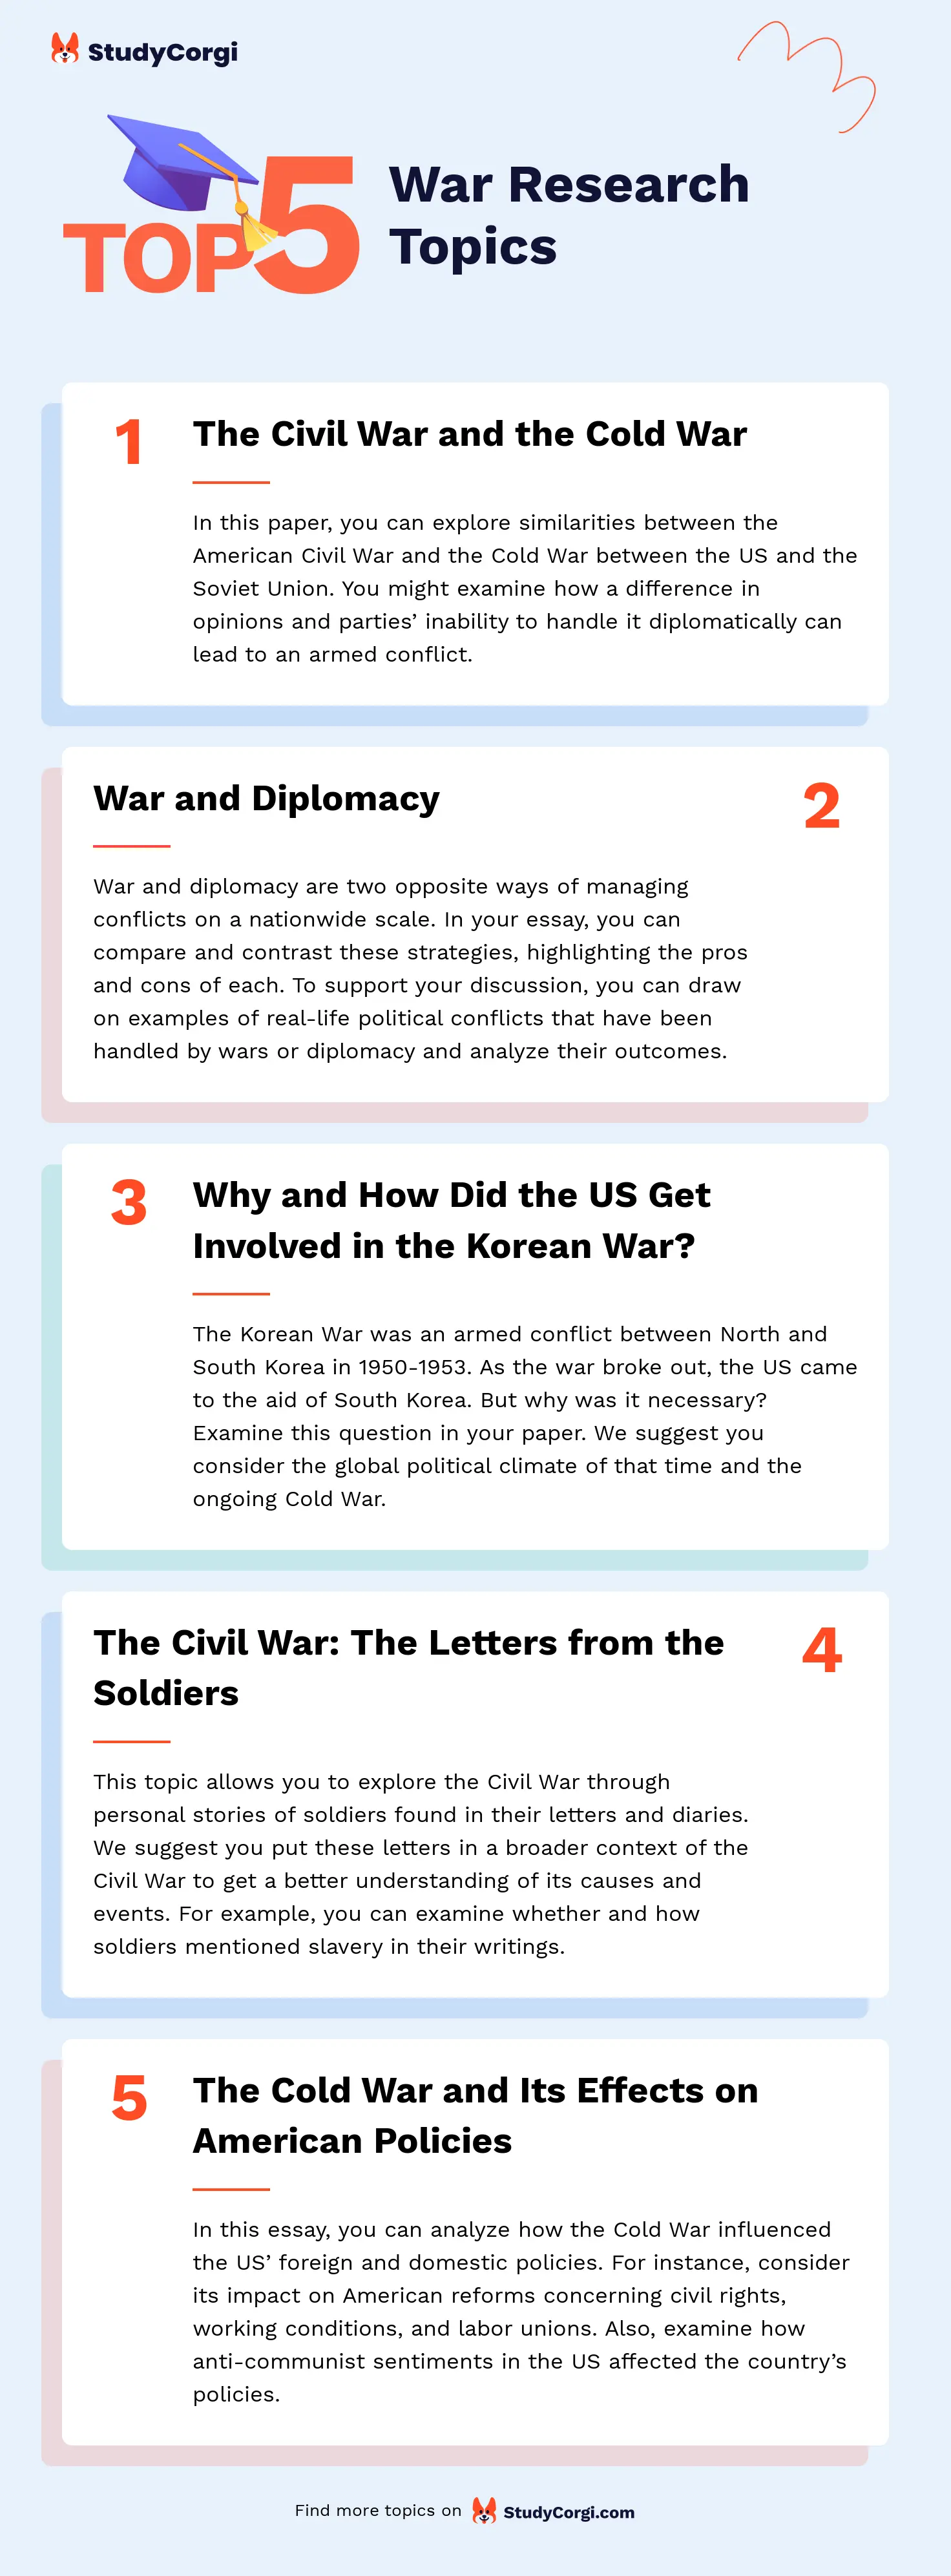 research topics about war literature